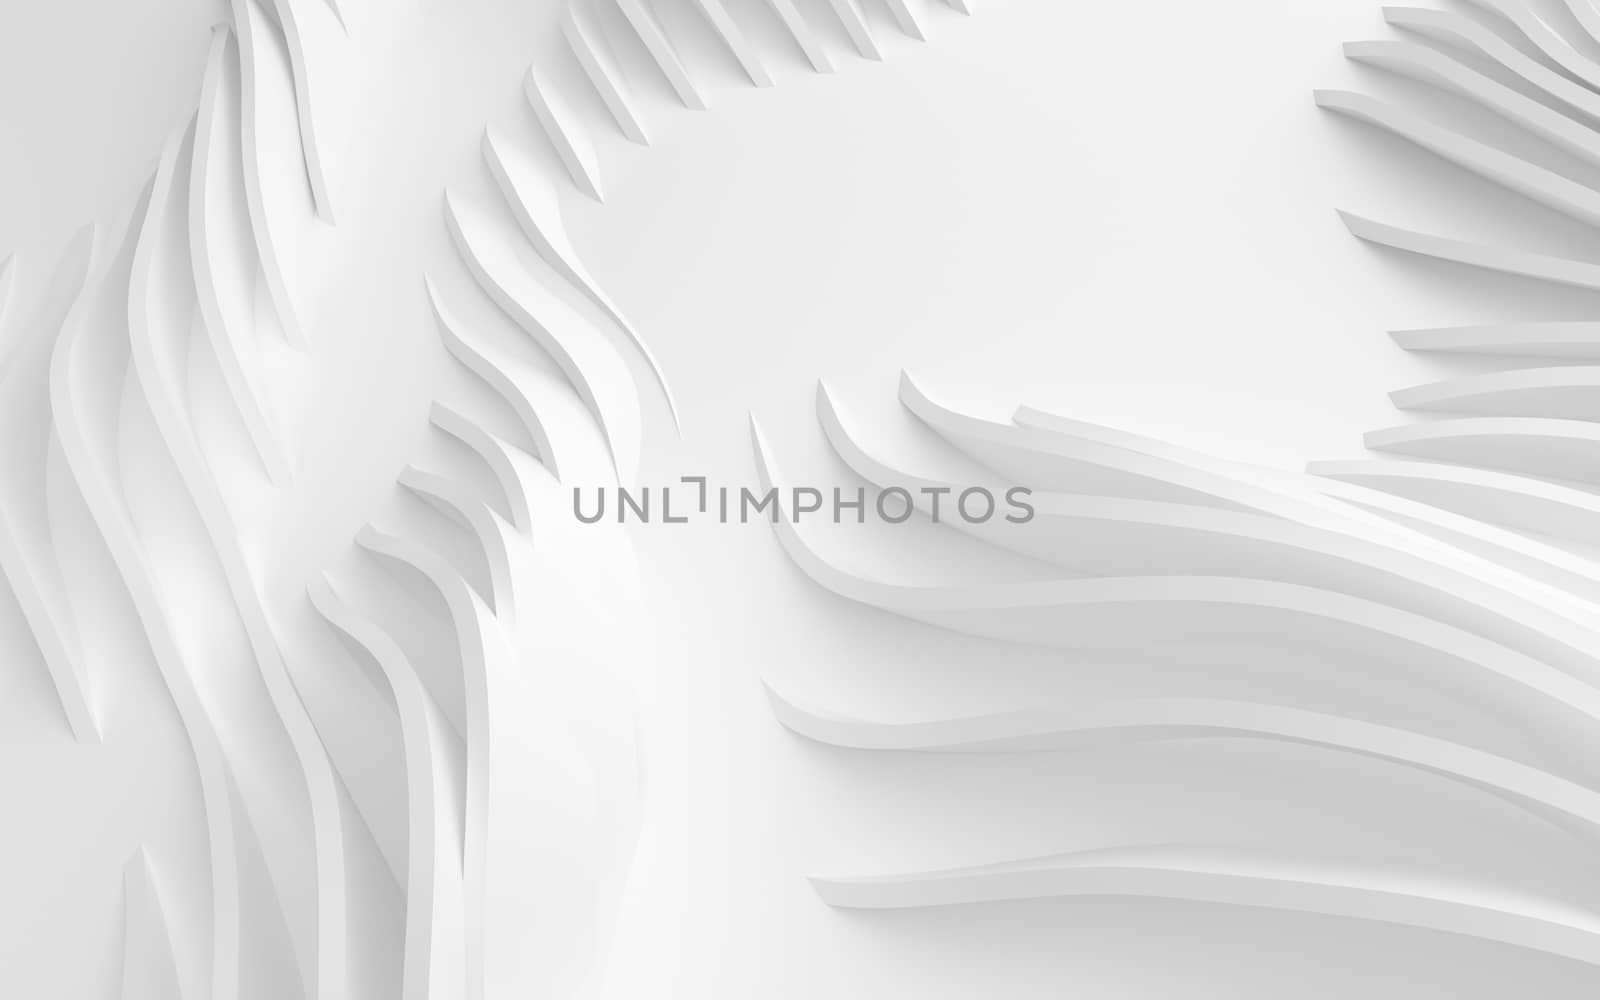 Abstract Curved Shapes. White Circular Background. Abstract background. 3d illustration